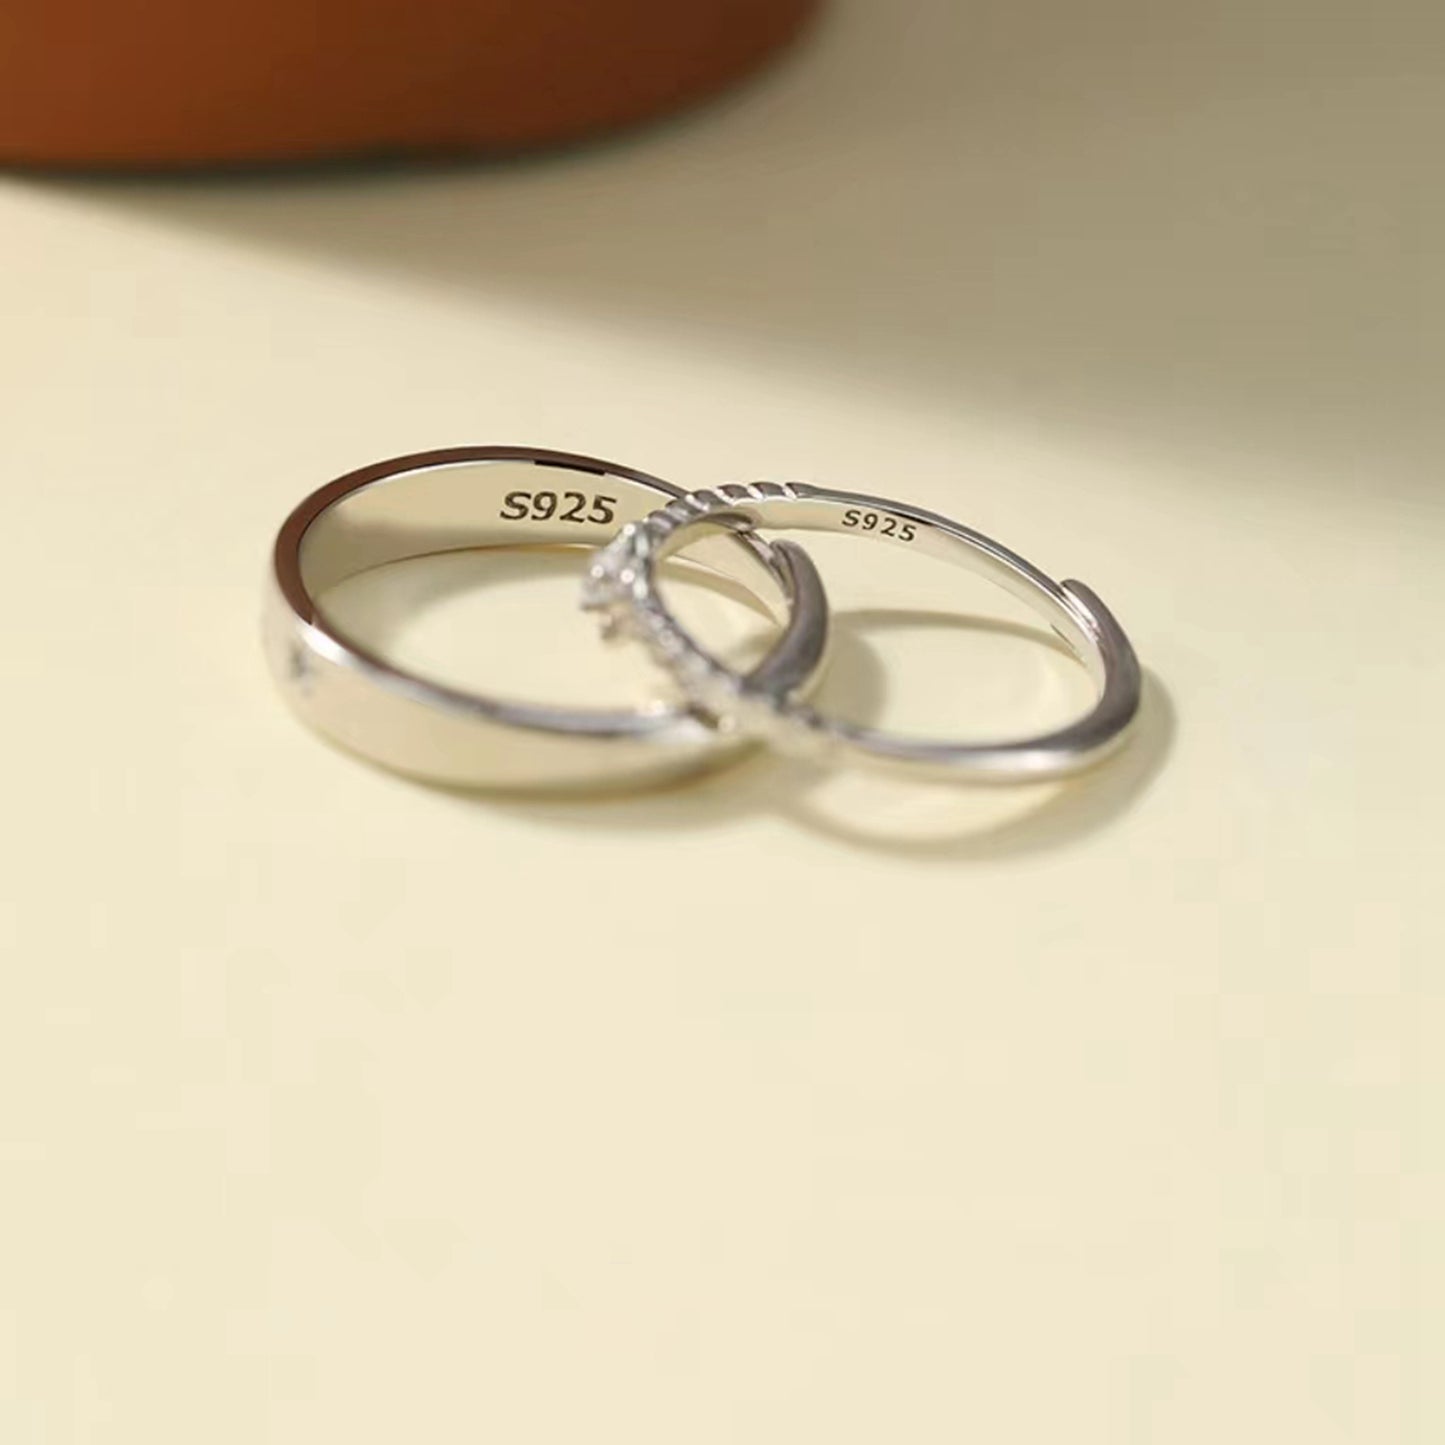 Little Prince and Rose Couple Ring